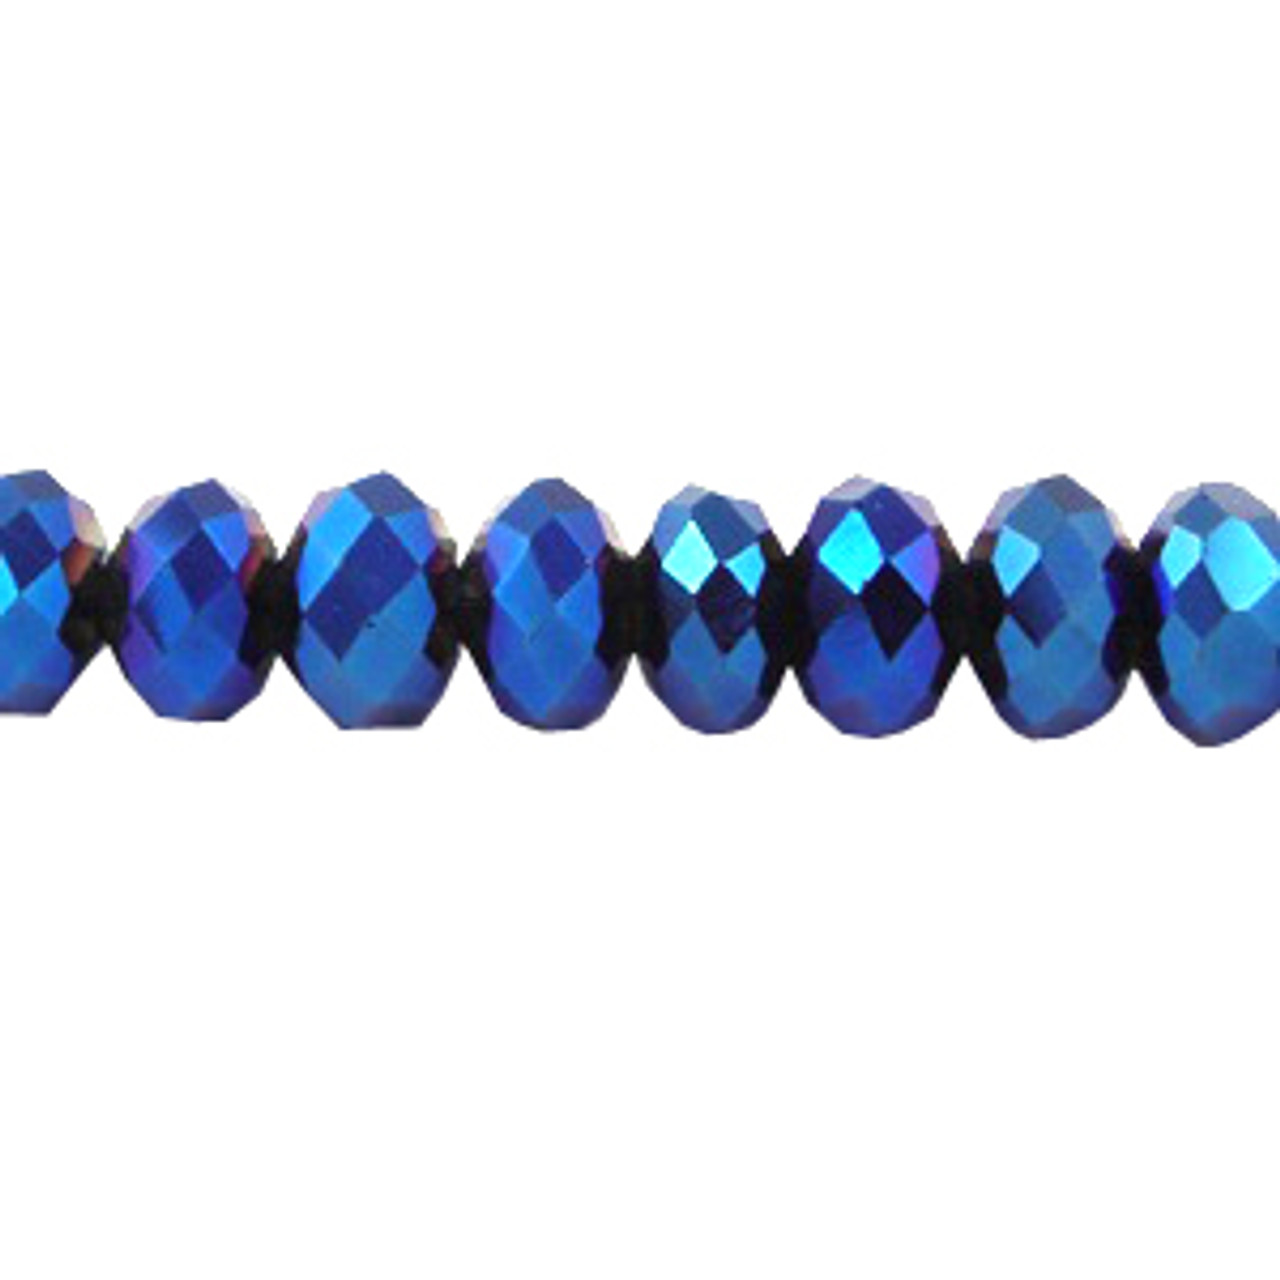 3X2mm Blue Light Faceted Roundel (Aprrox 150 Beads) #39